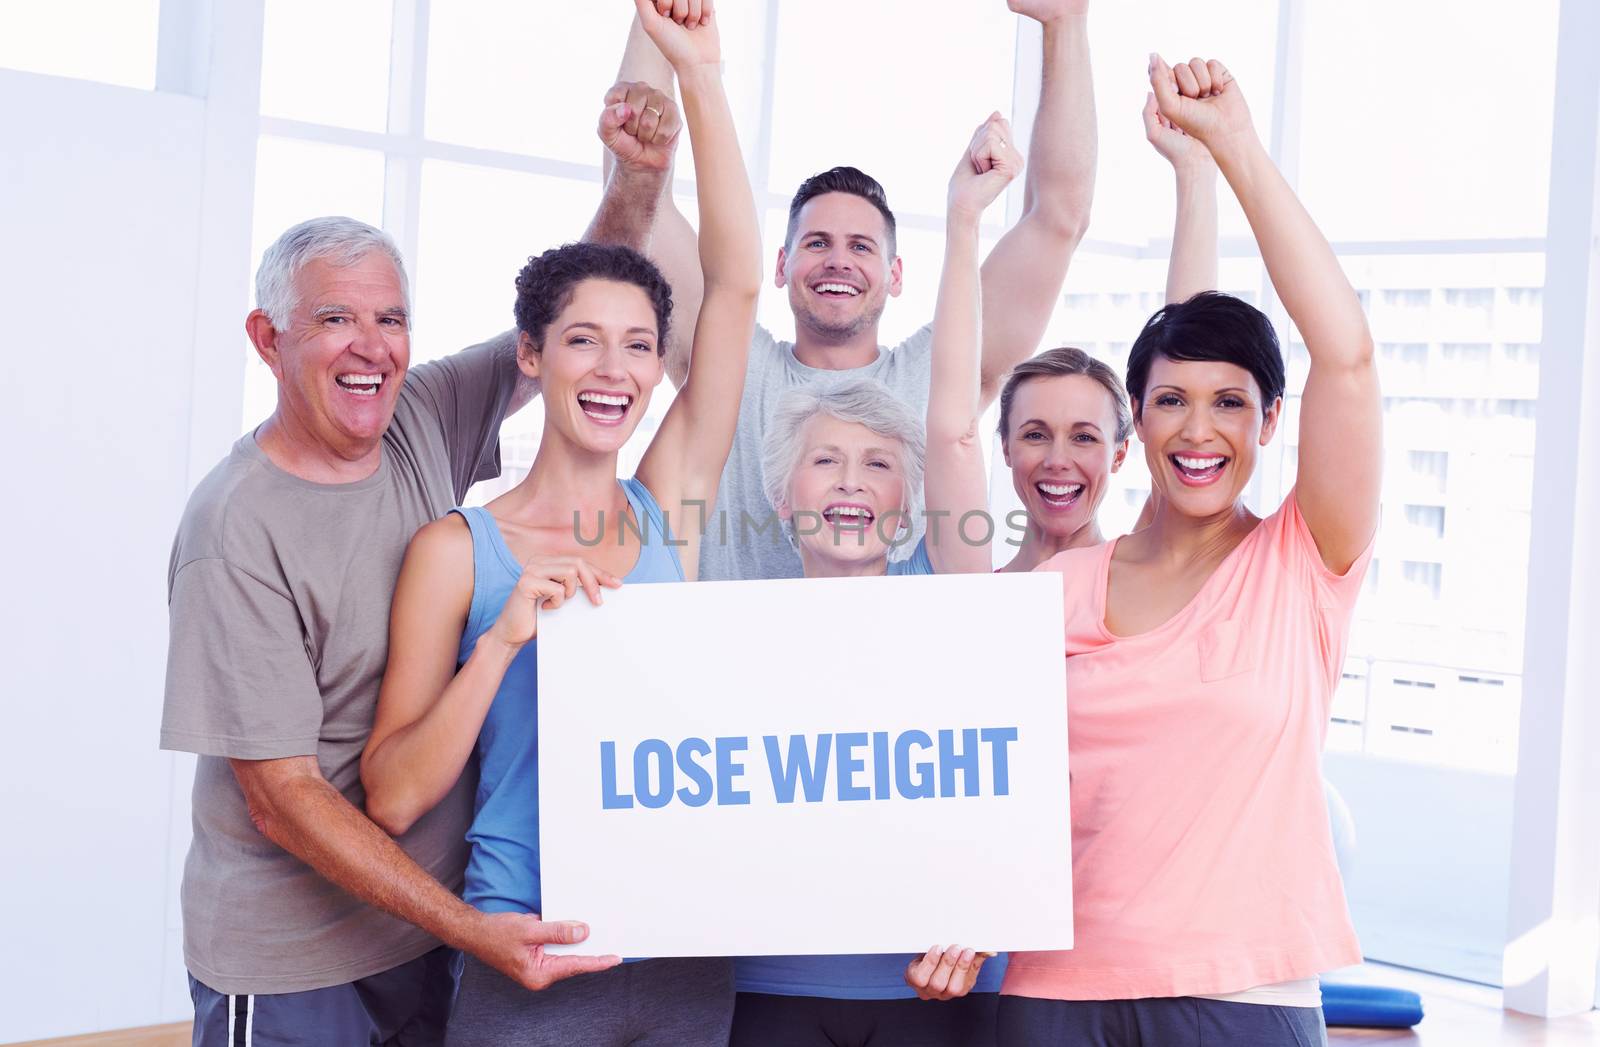 Lose weight against portrait of happy fit people holding blank board by Wavebreakmedia